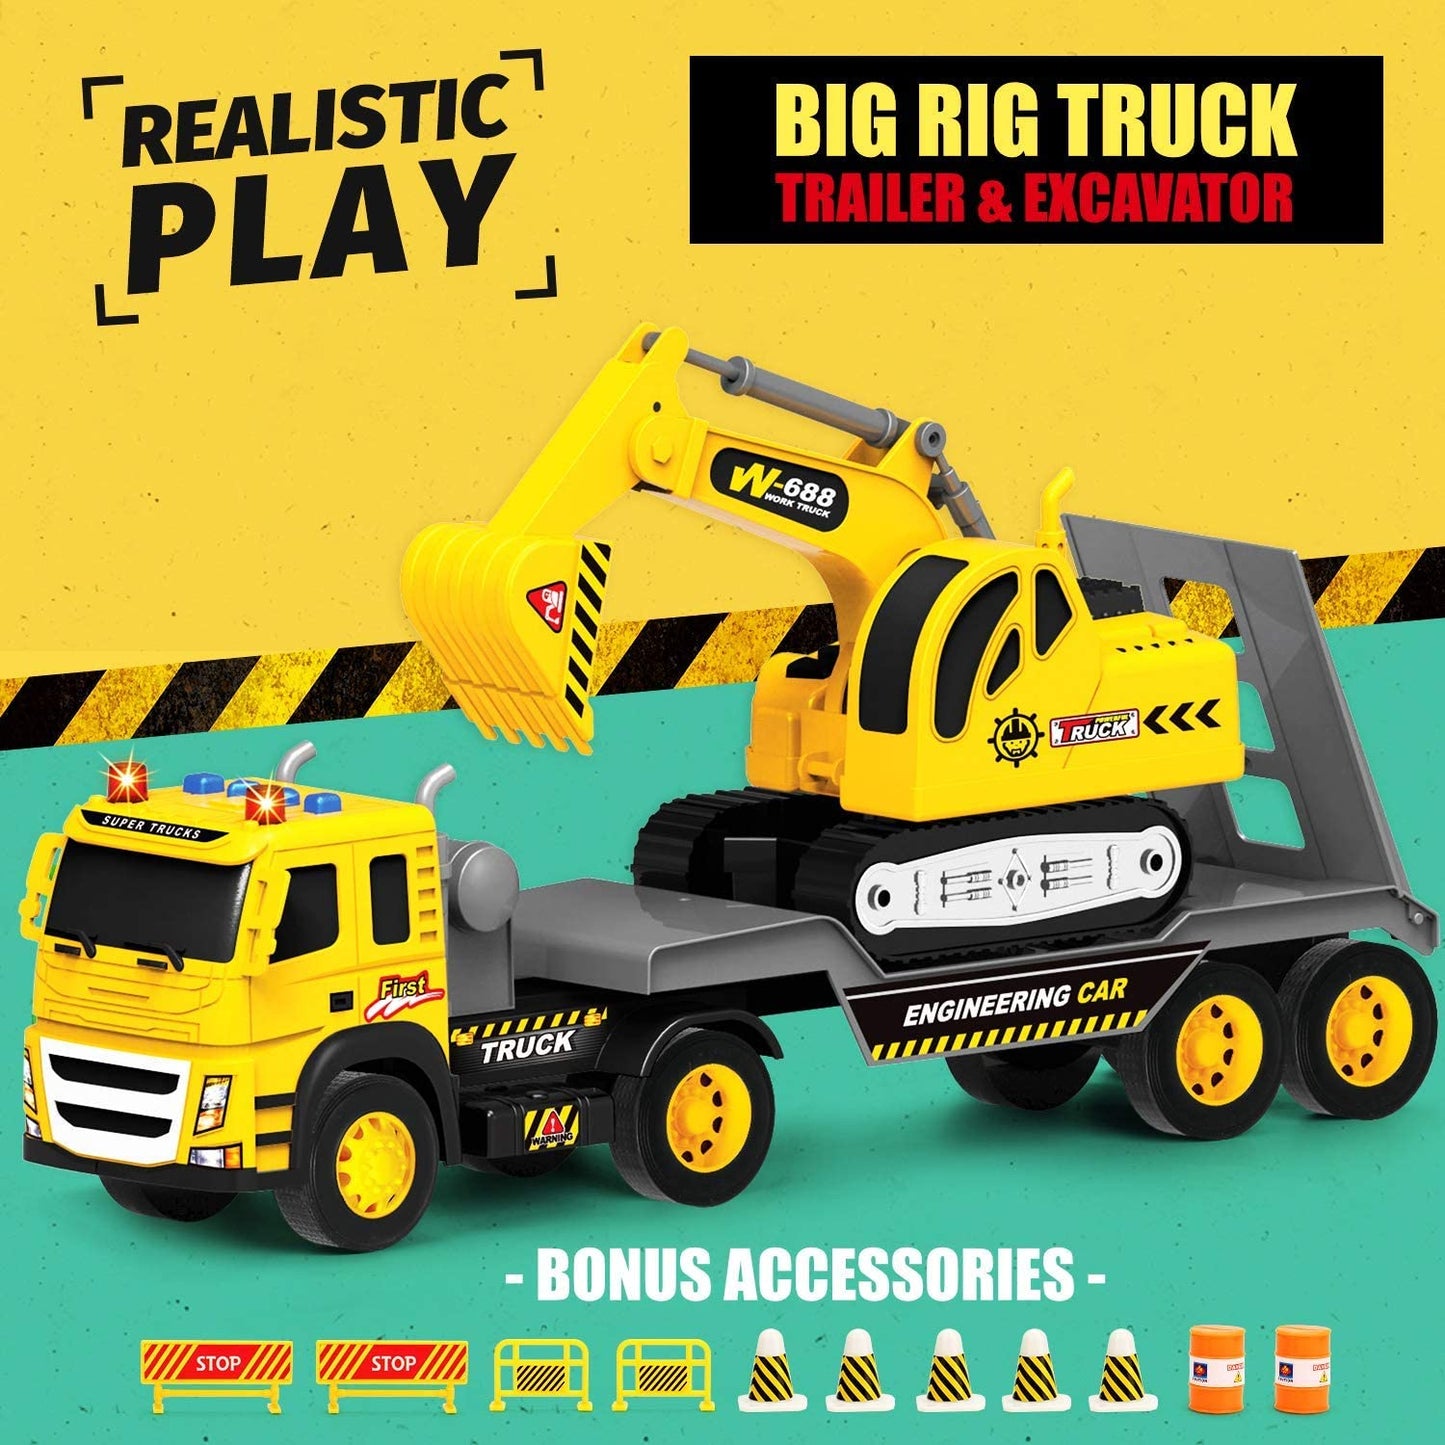 1:12 Scale Flatbed Truck with Excavator Tractor | 2 Trucks with Accessories Toy Set